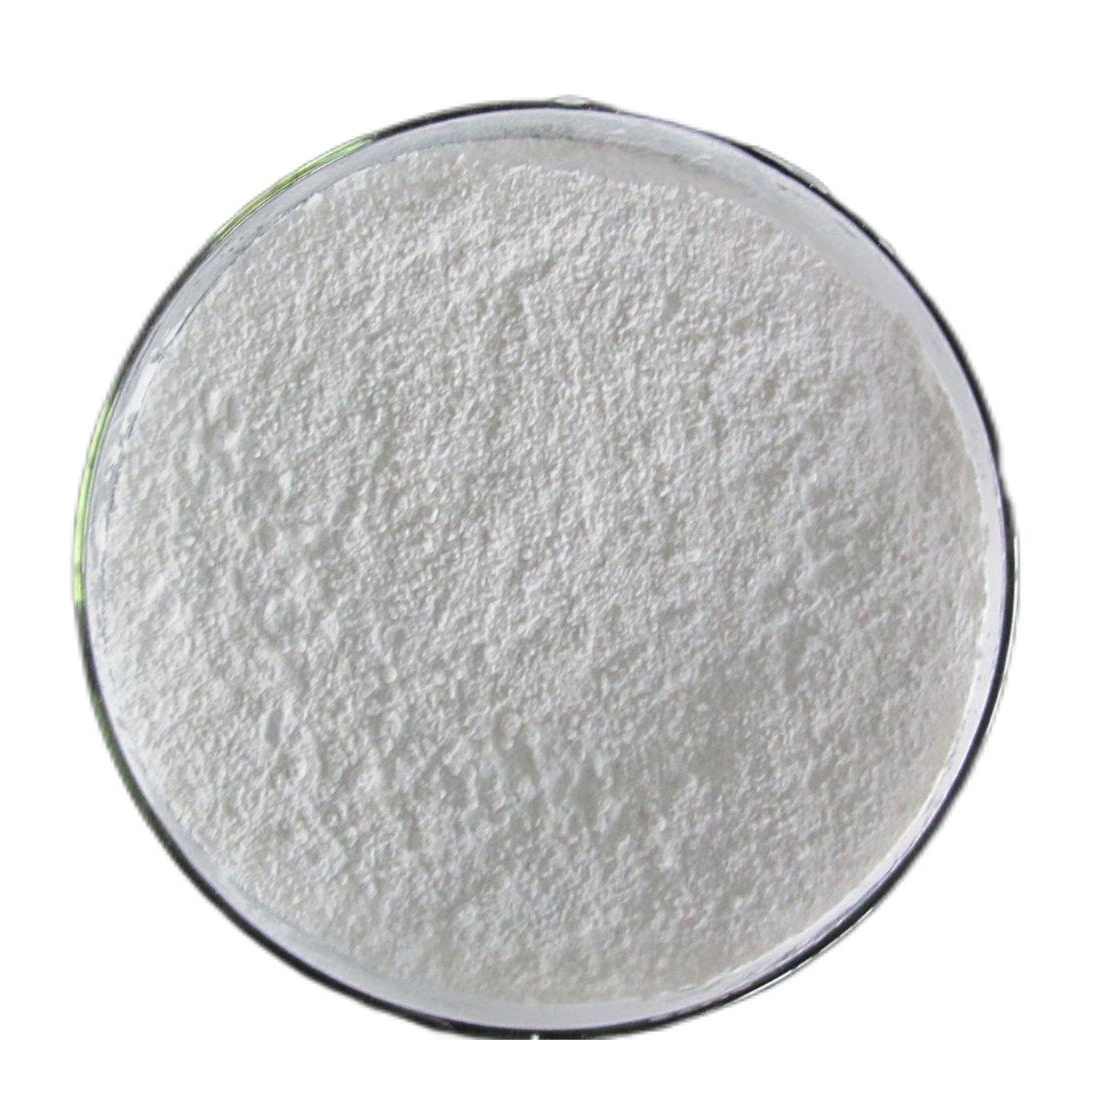 Antioxidant Lw-616 for Tyre Manufactures and Rubber Industries